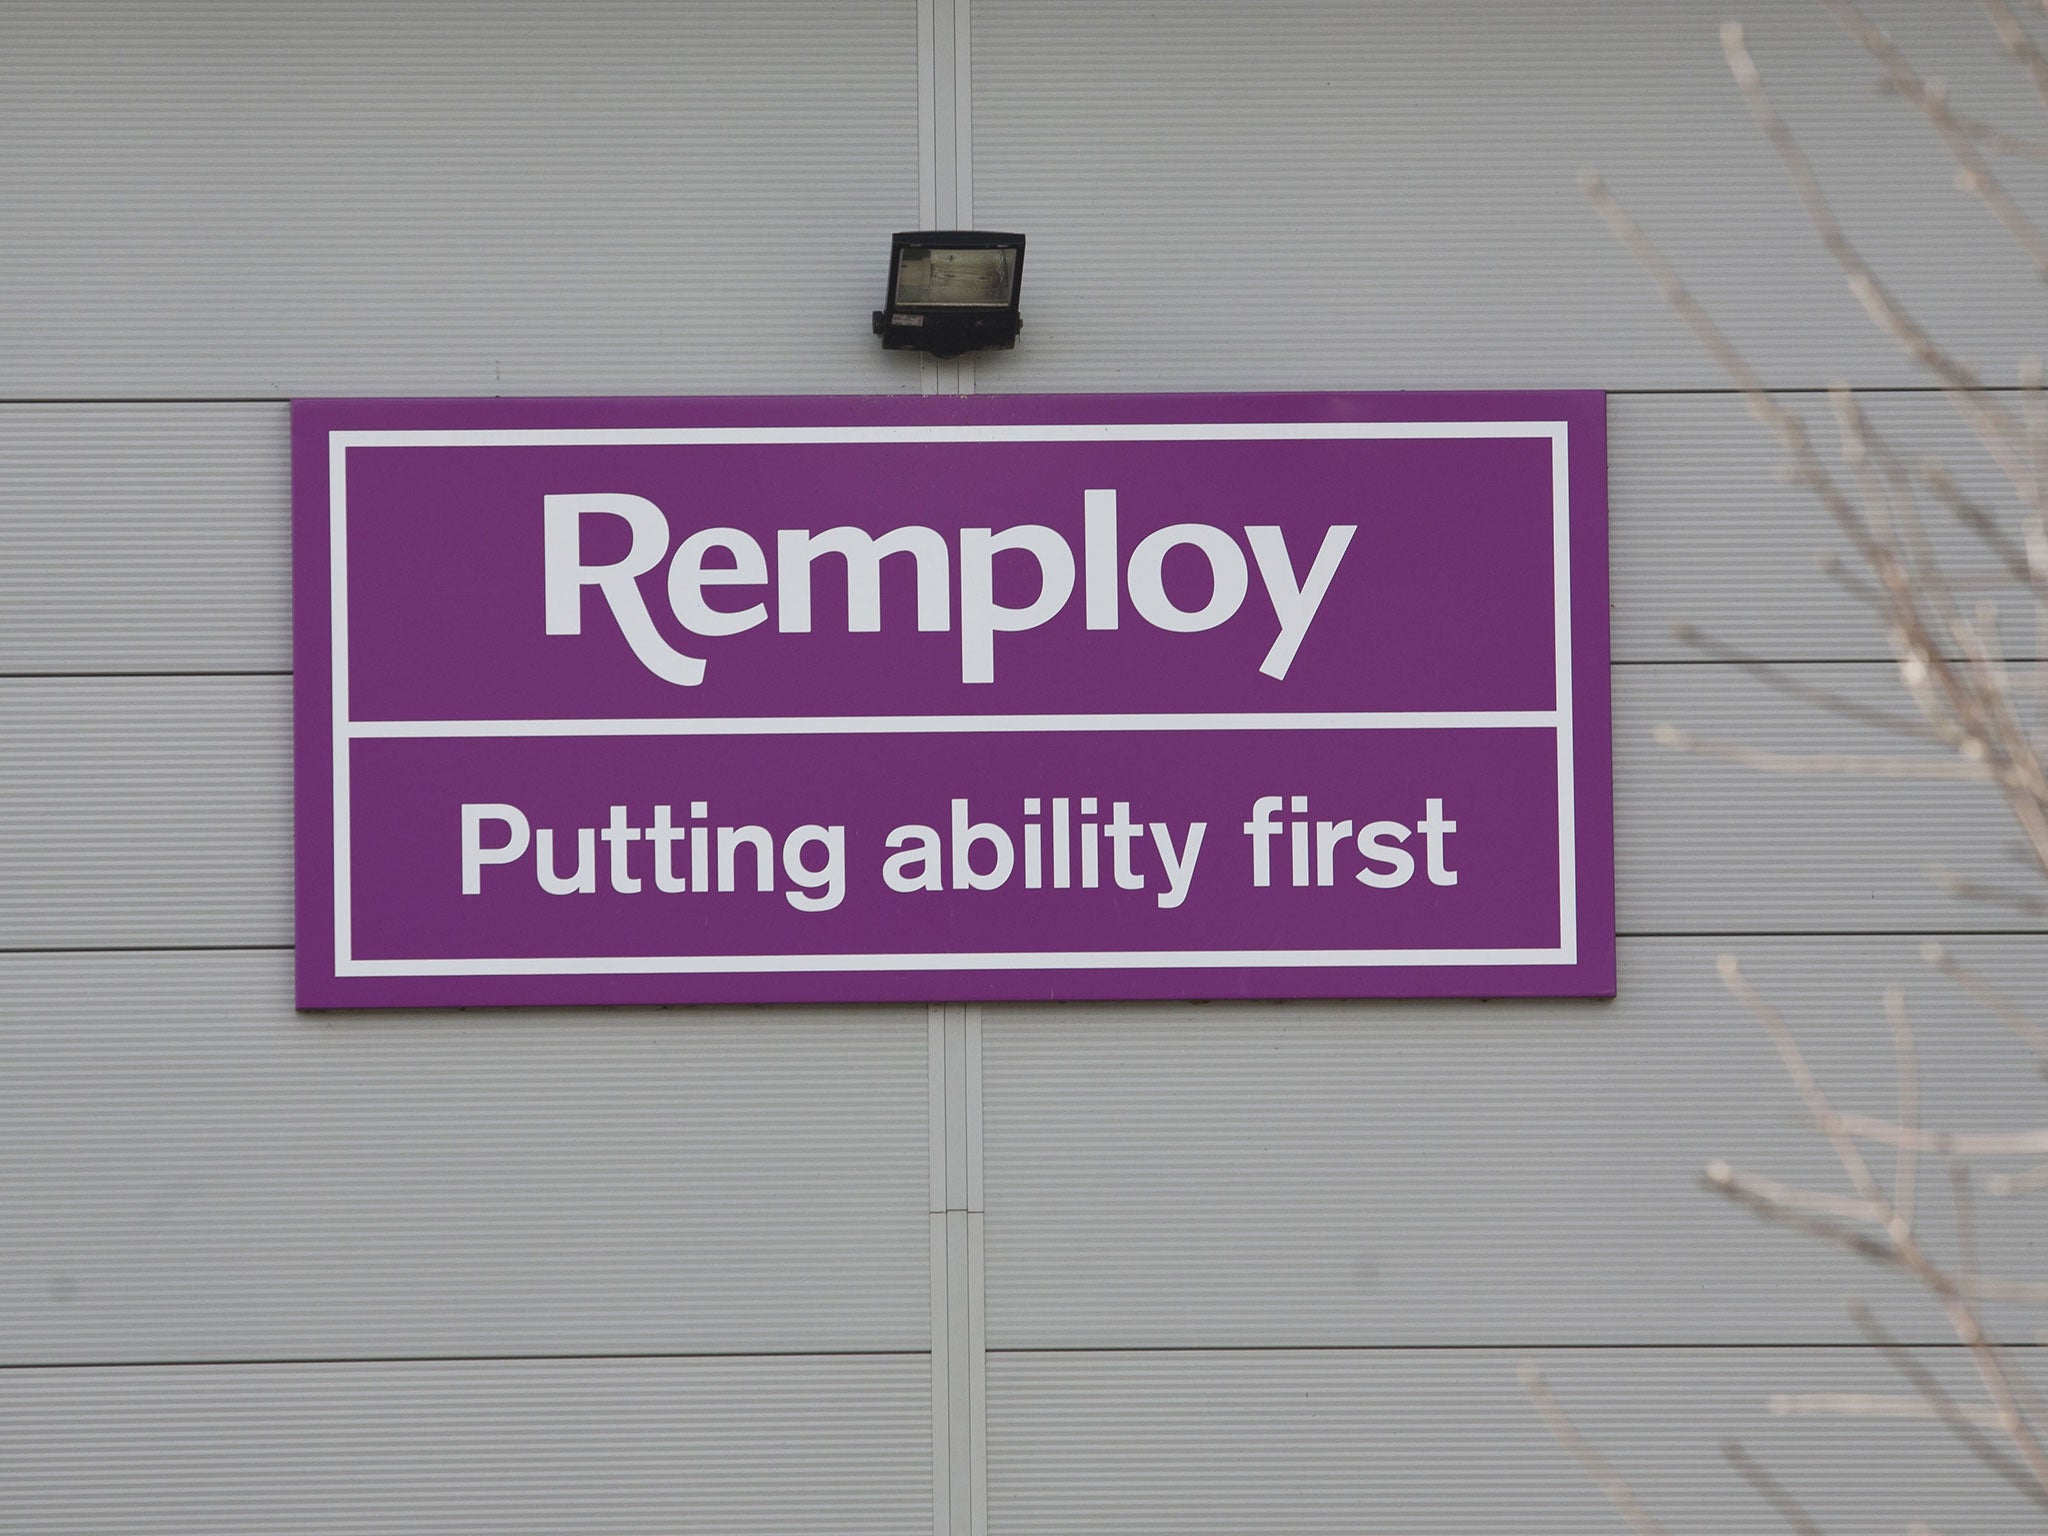 Hundreds of Remploy staff have refused to reapply for their jobs after they were offered half their previous £17-per-hour pay